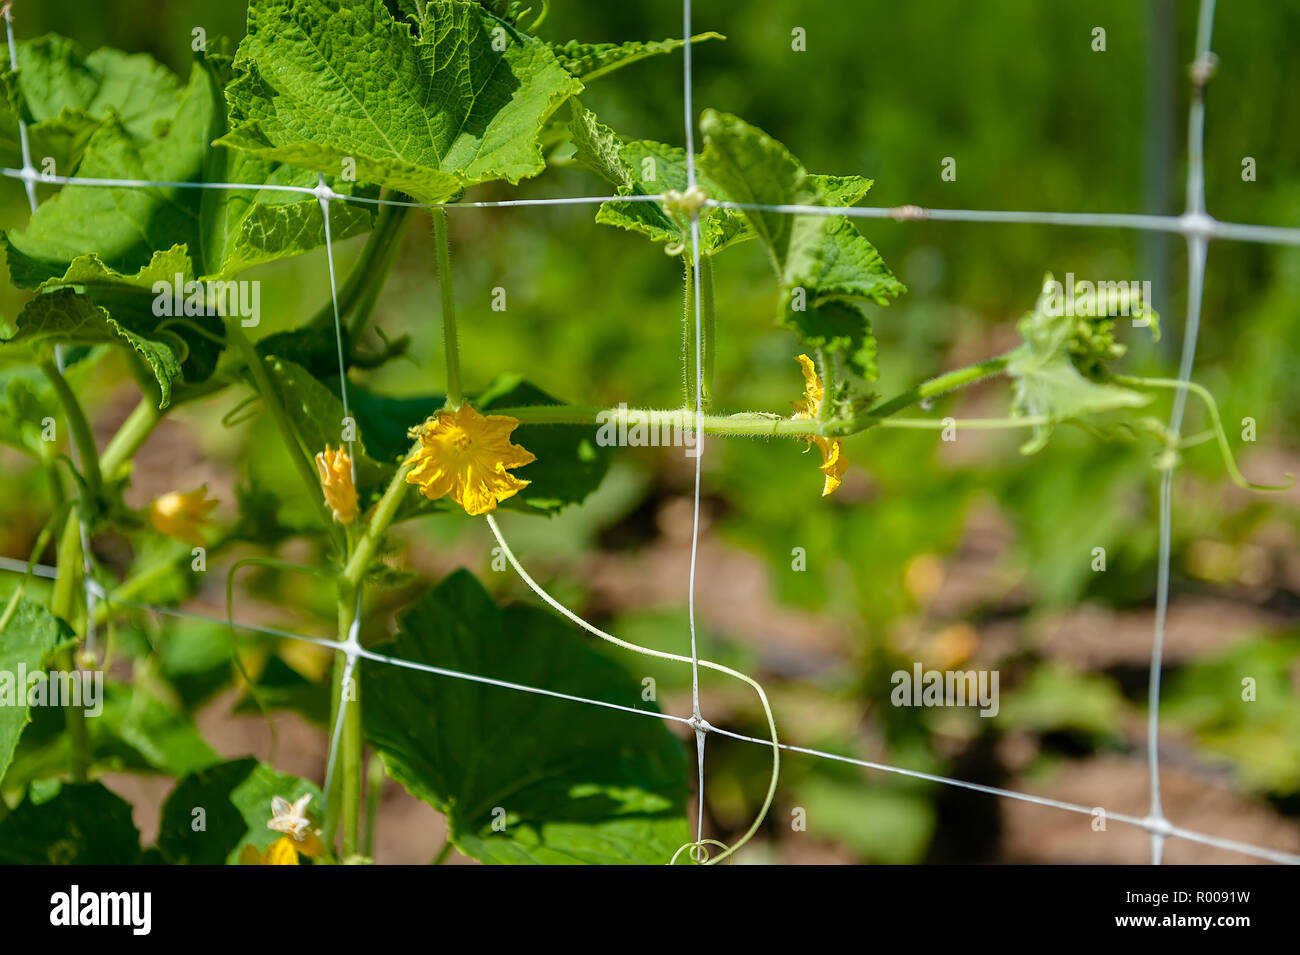 Trellis grid with cucumber blossoms. Stock Photo